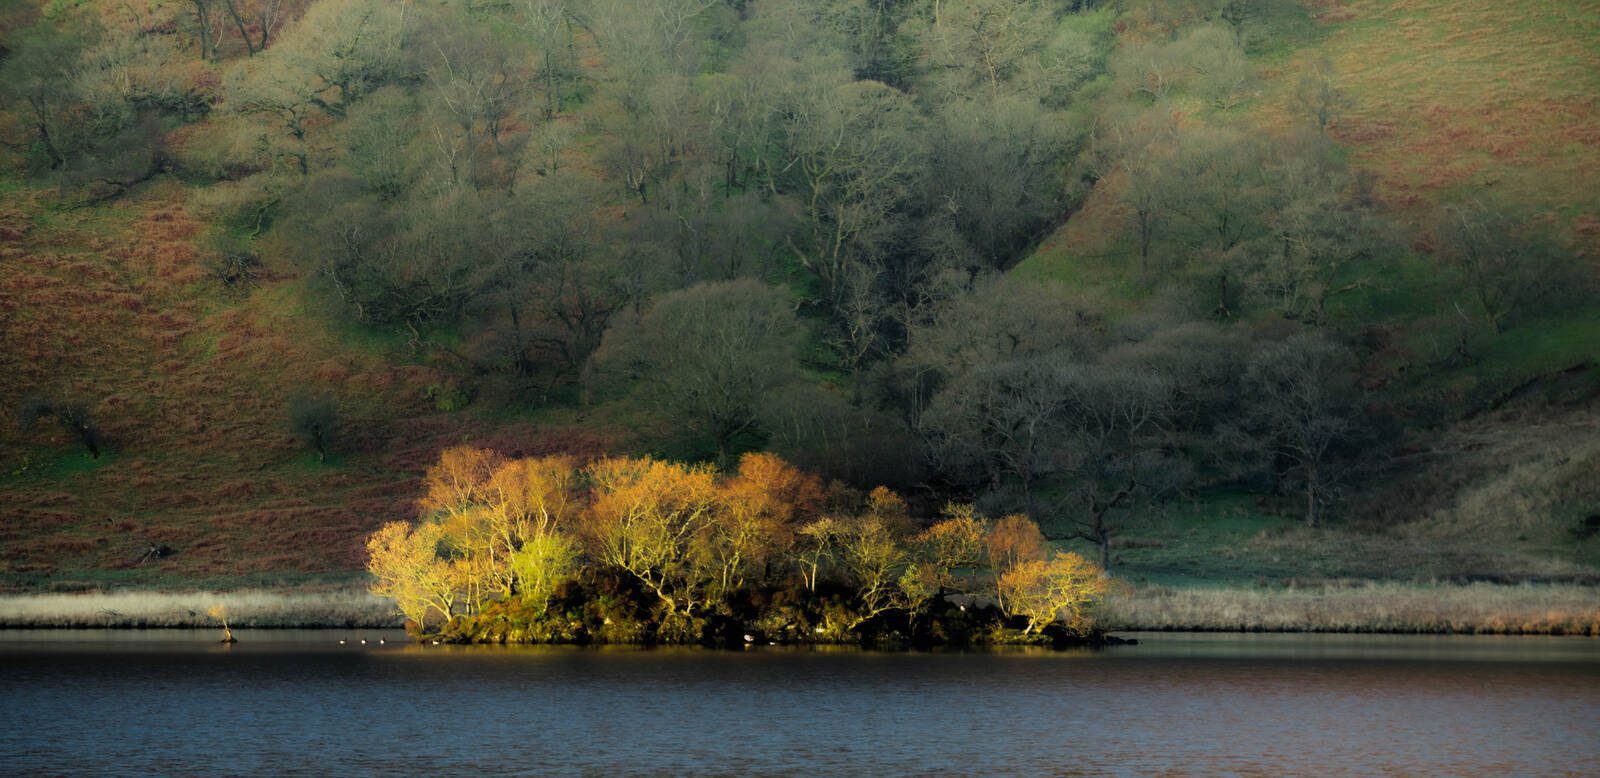 Image of Crummock Water by michael bennett